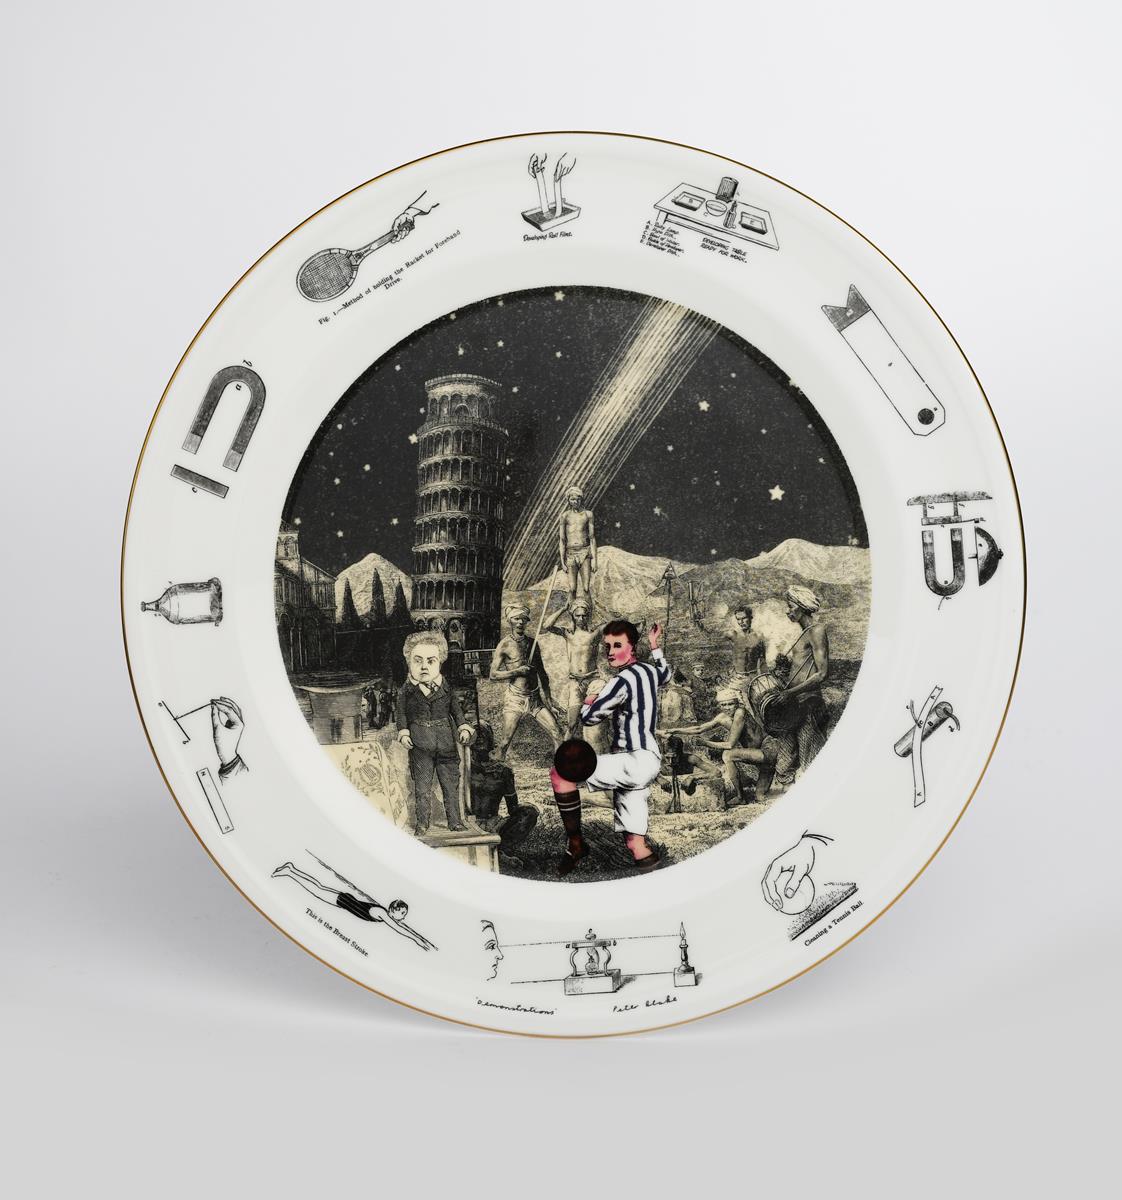 'Demonstrations' a Wedgwood limited edition plate designed by Peter Blake, commissioned by the